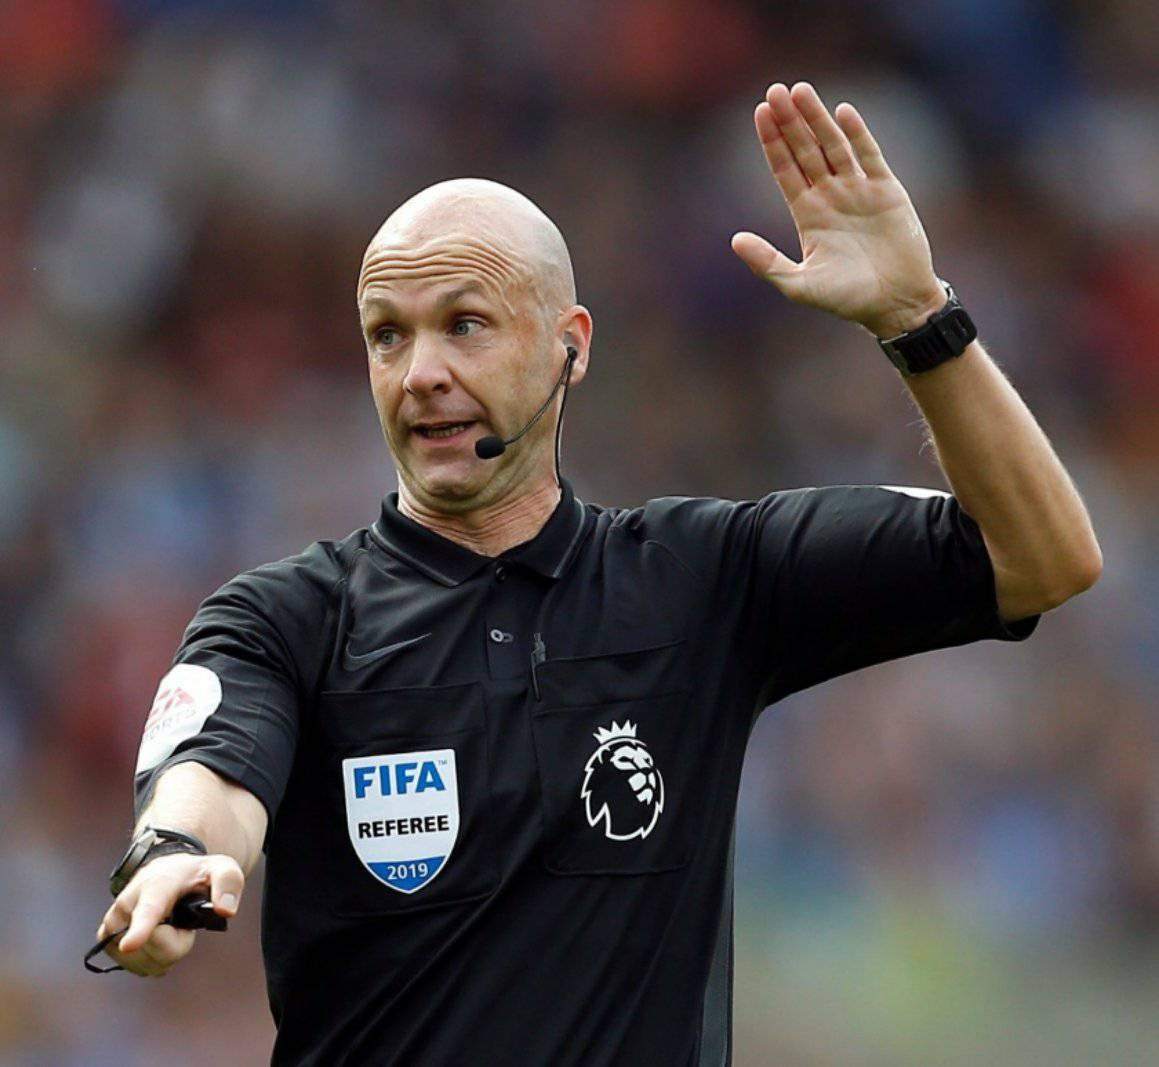 Anthony Taylor refereeing in a match